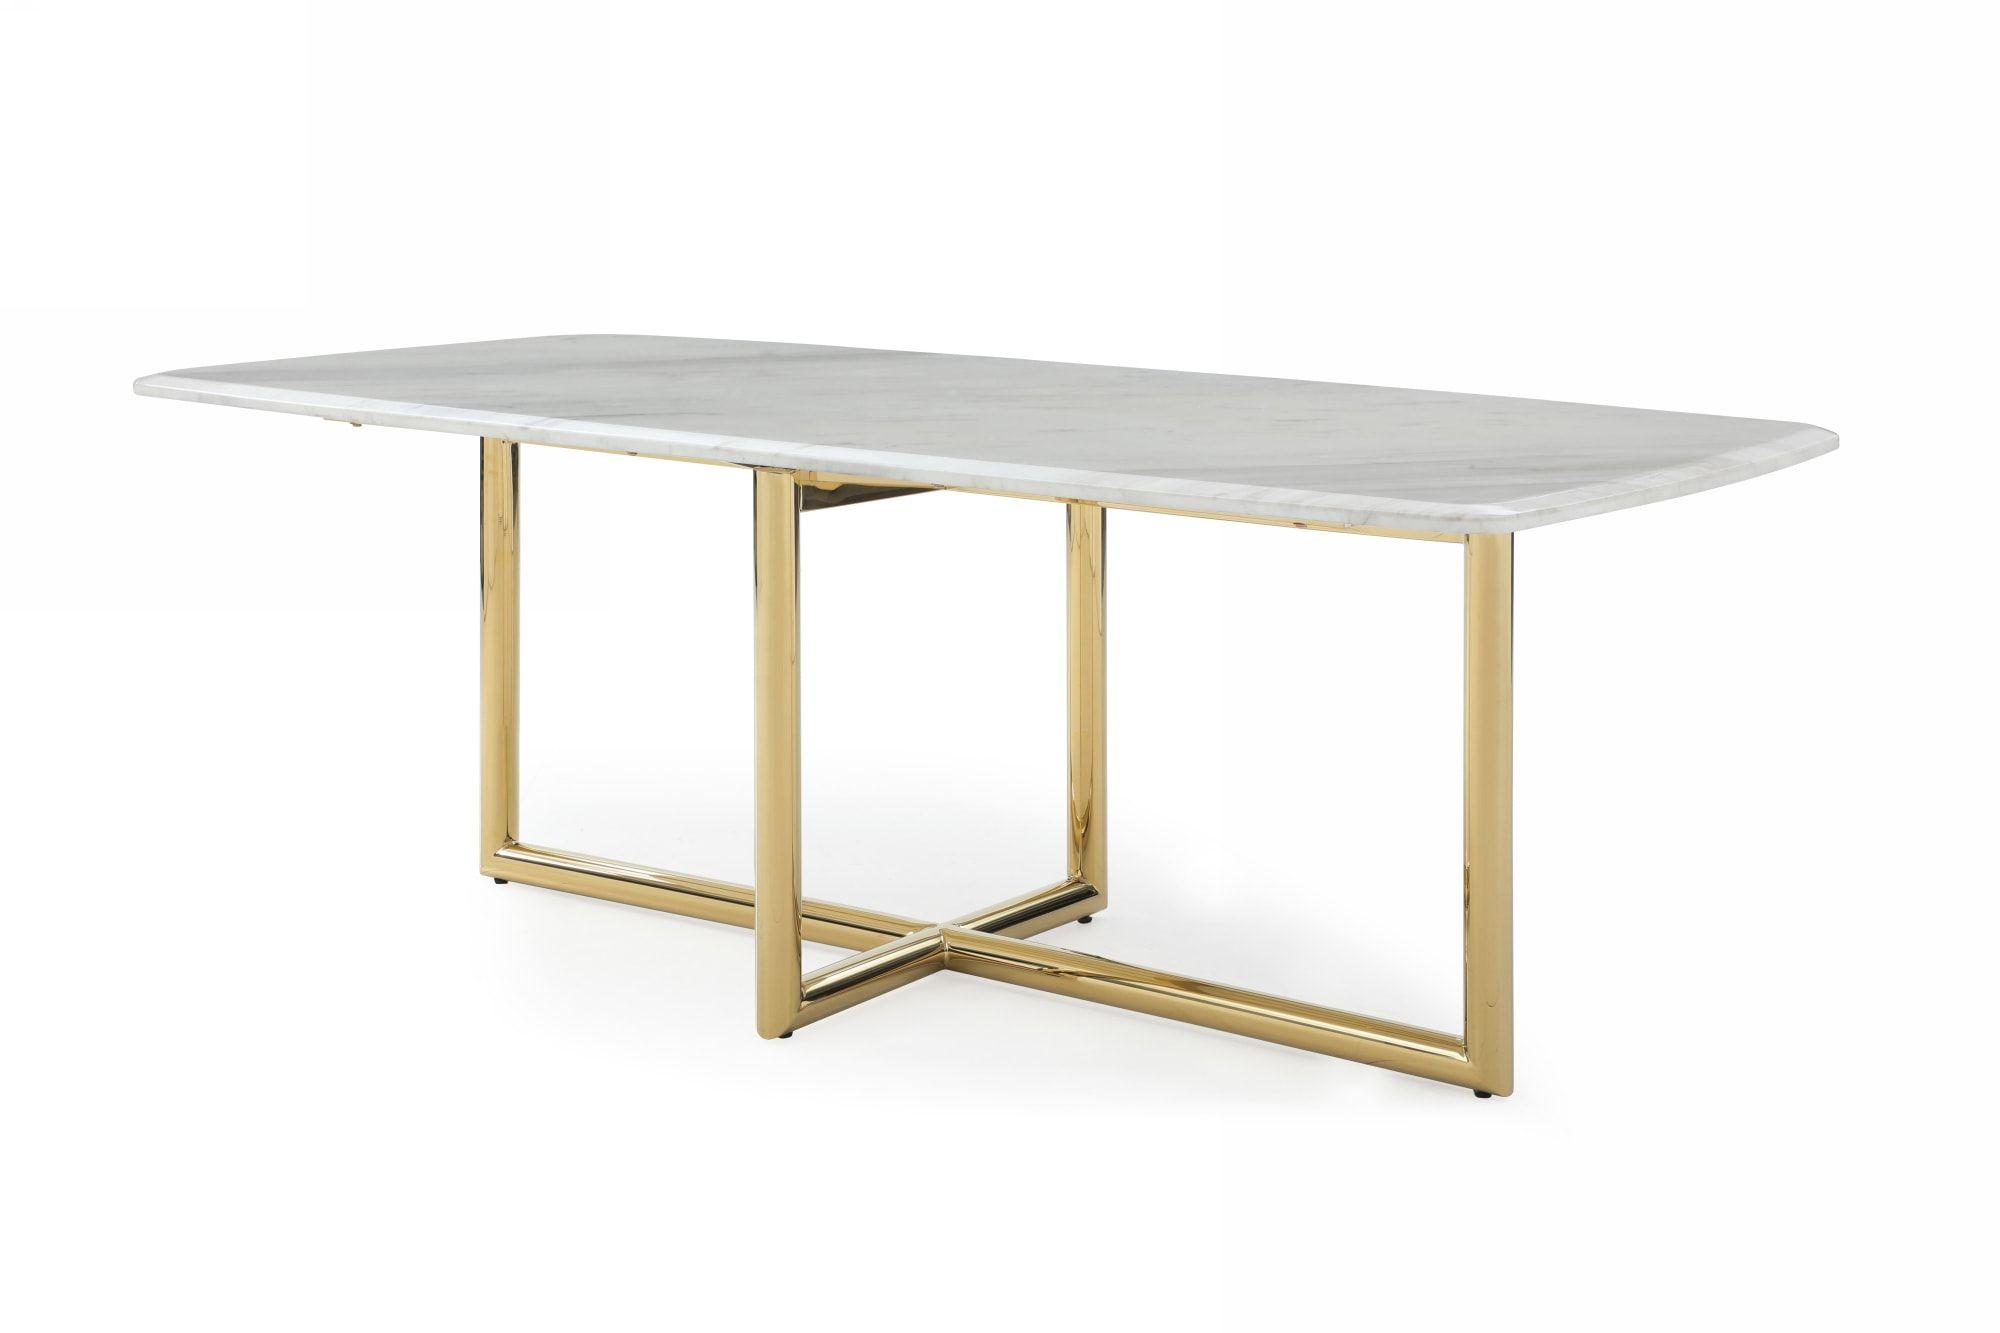 Contemporary, Modern Dining Table Empress VGVCT1908 in White, Gold 